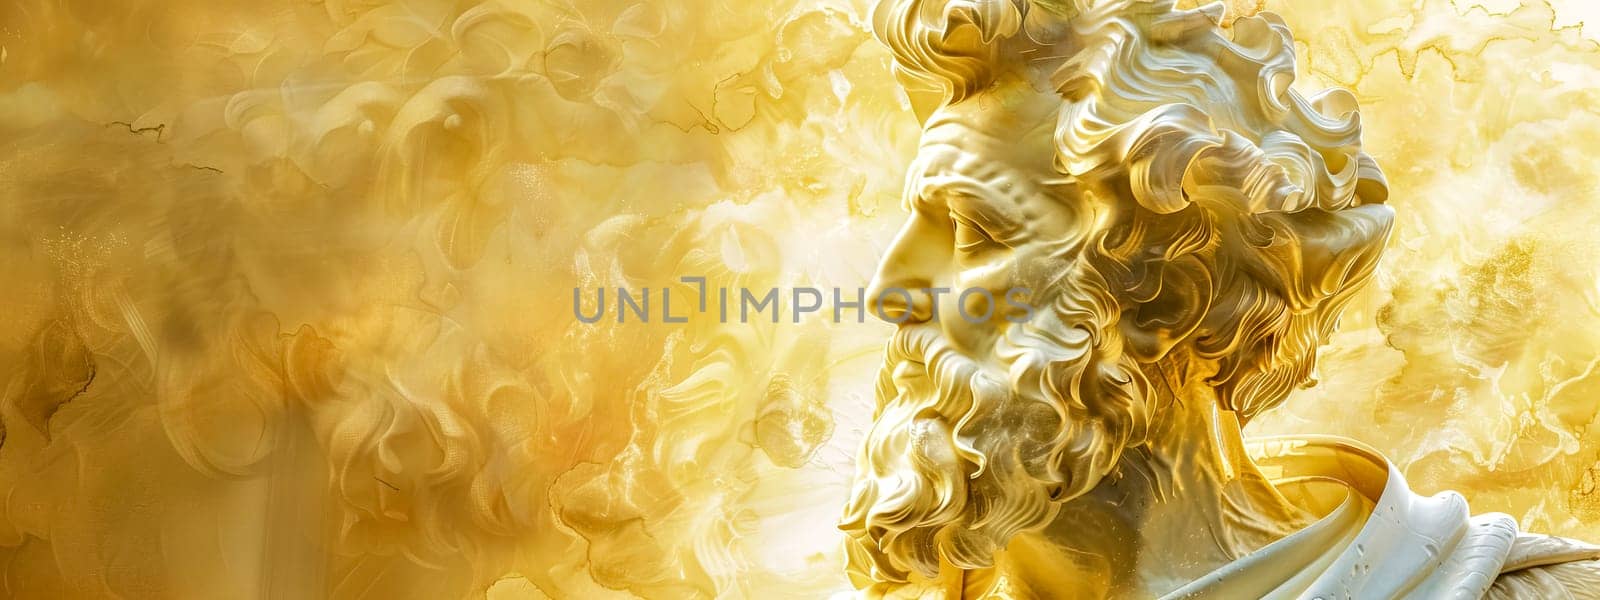 Golden statue of greek god on abstract background by Edophoto